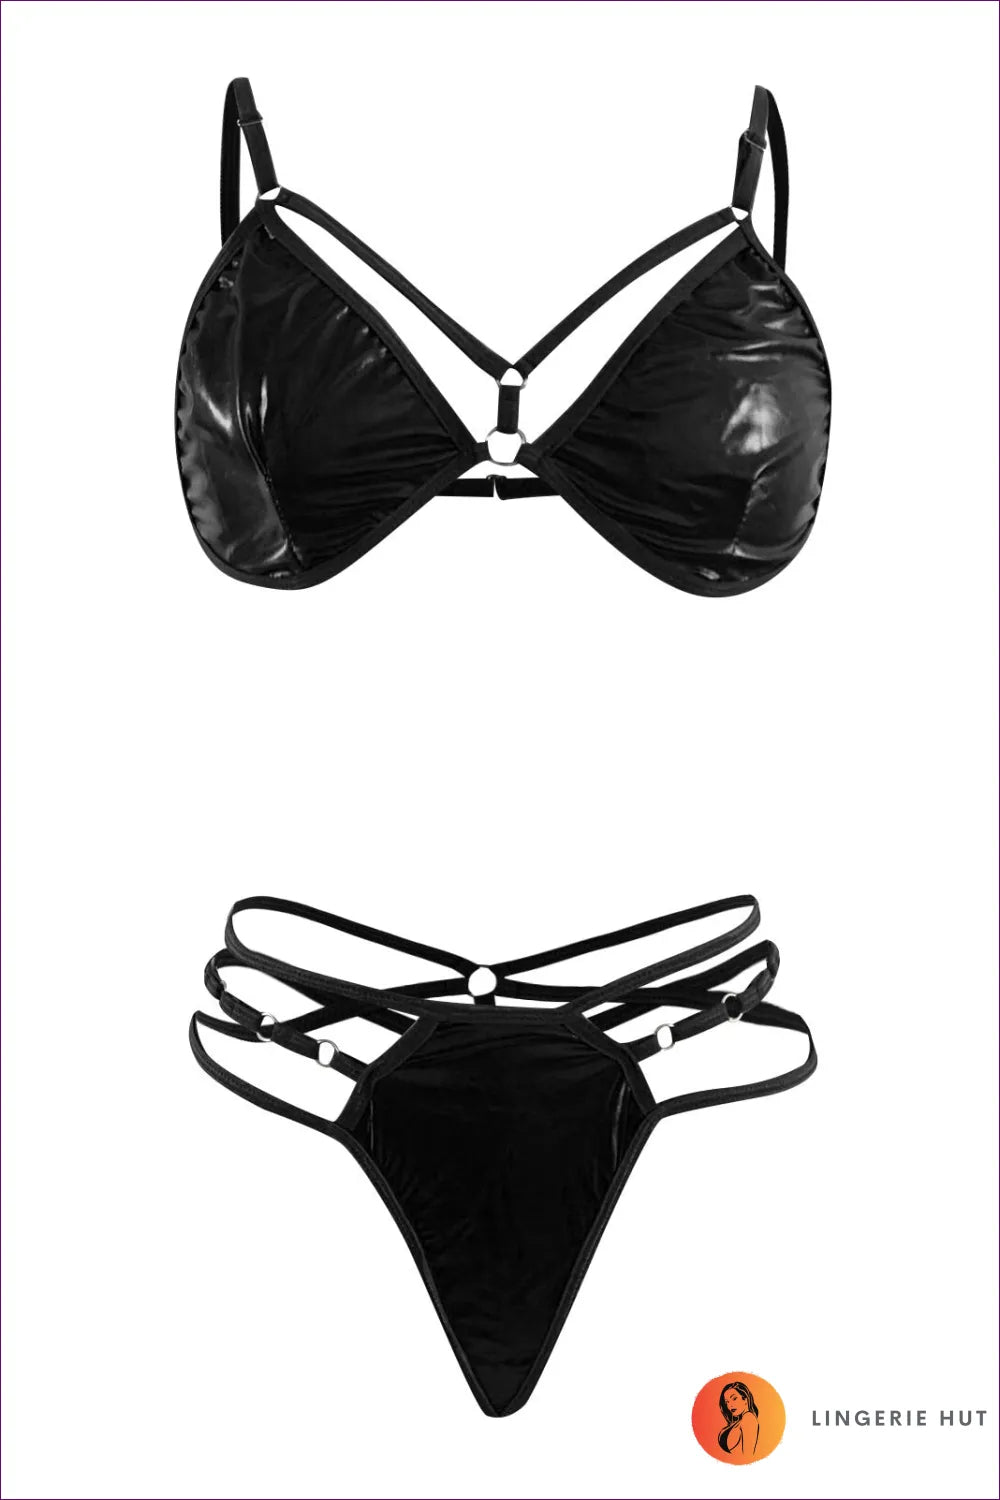 Command Attention With This Striking Bra Set! Embrace Wet-look Luxury And Adjustable Straps For a Daring